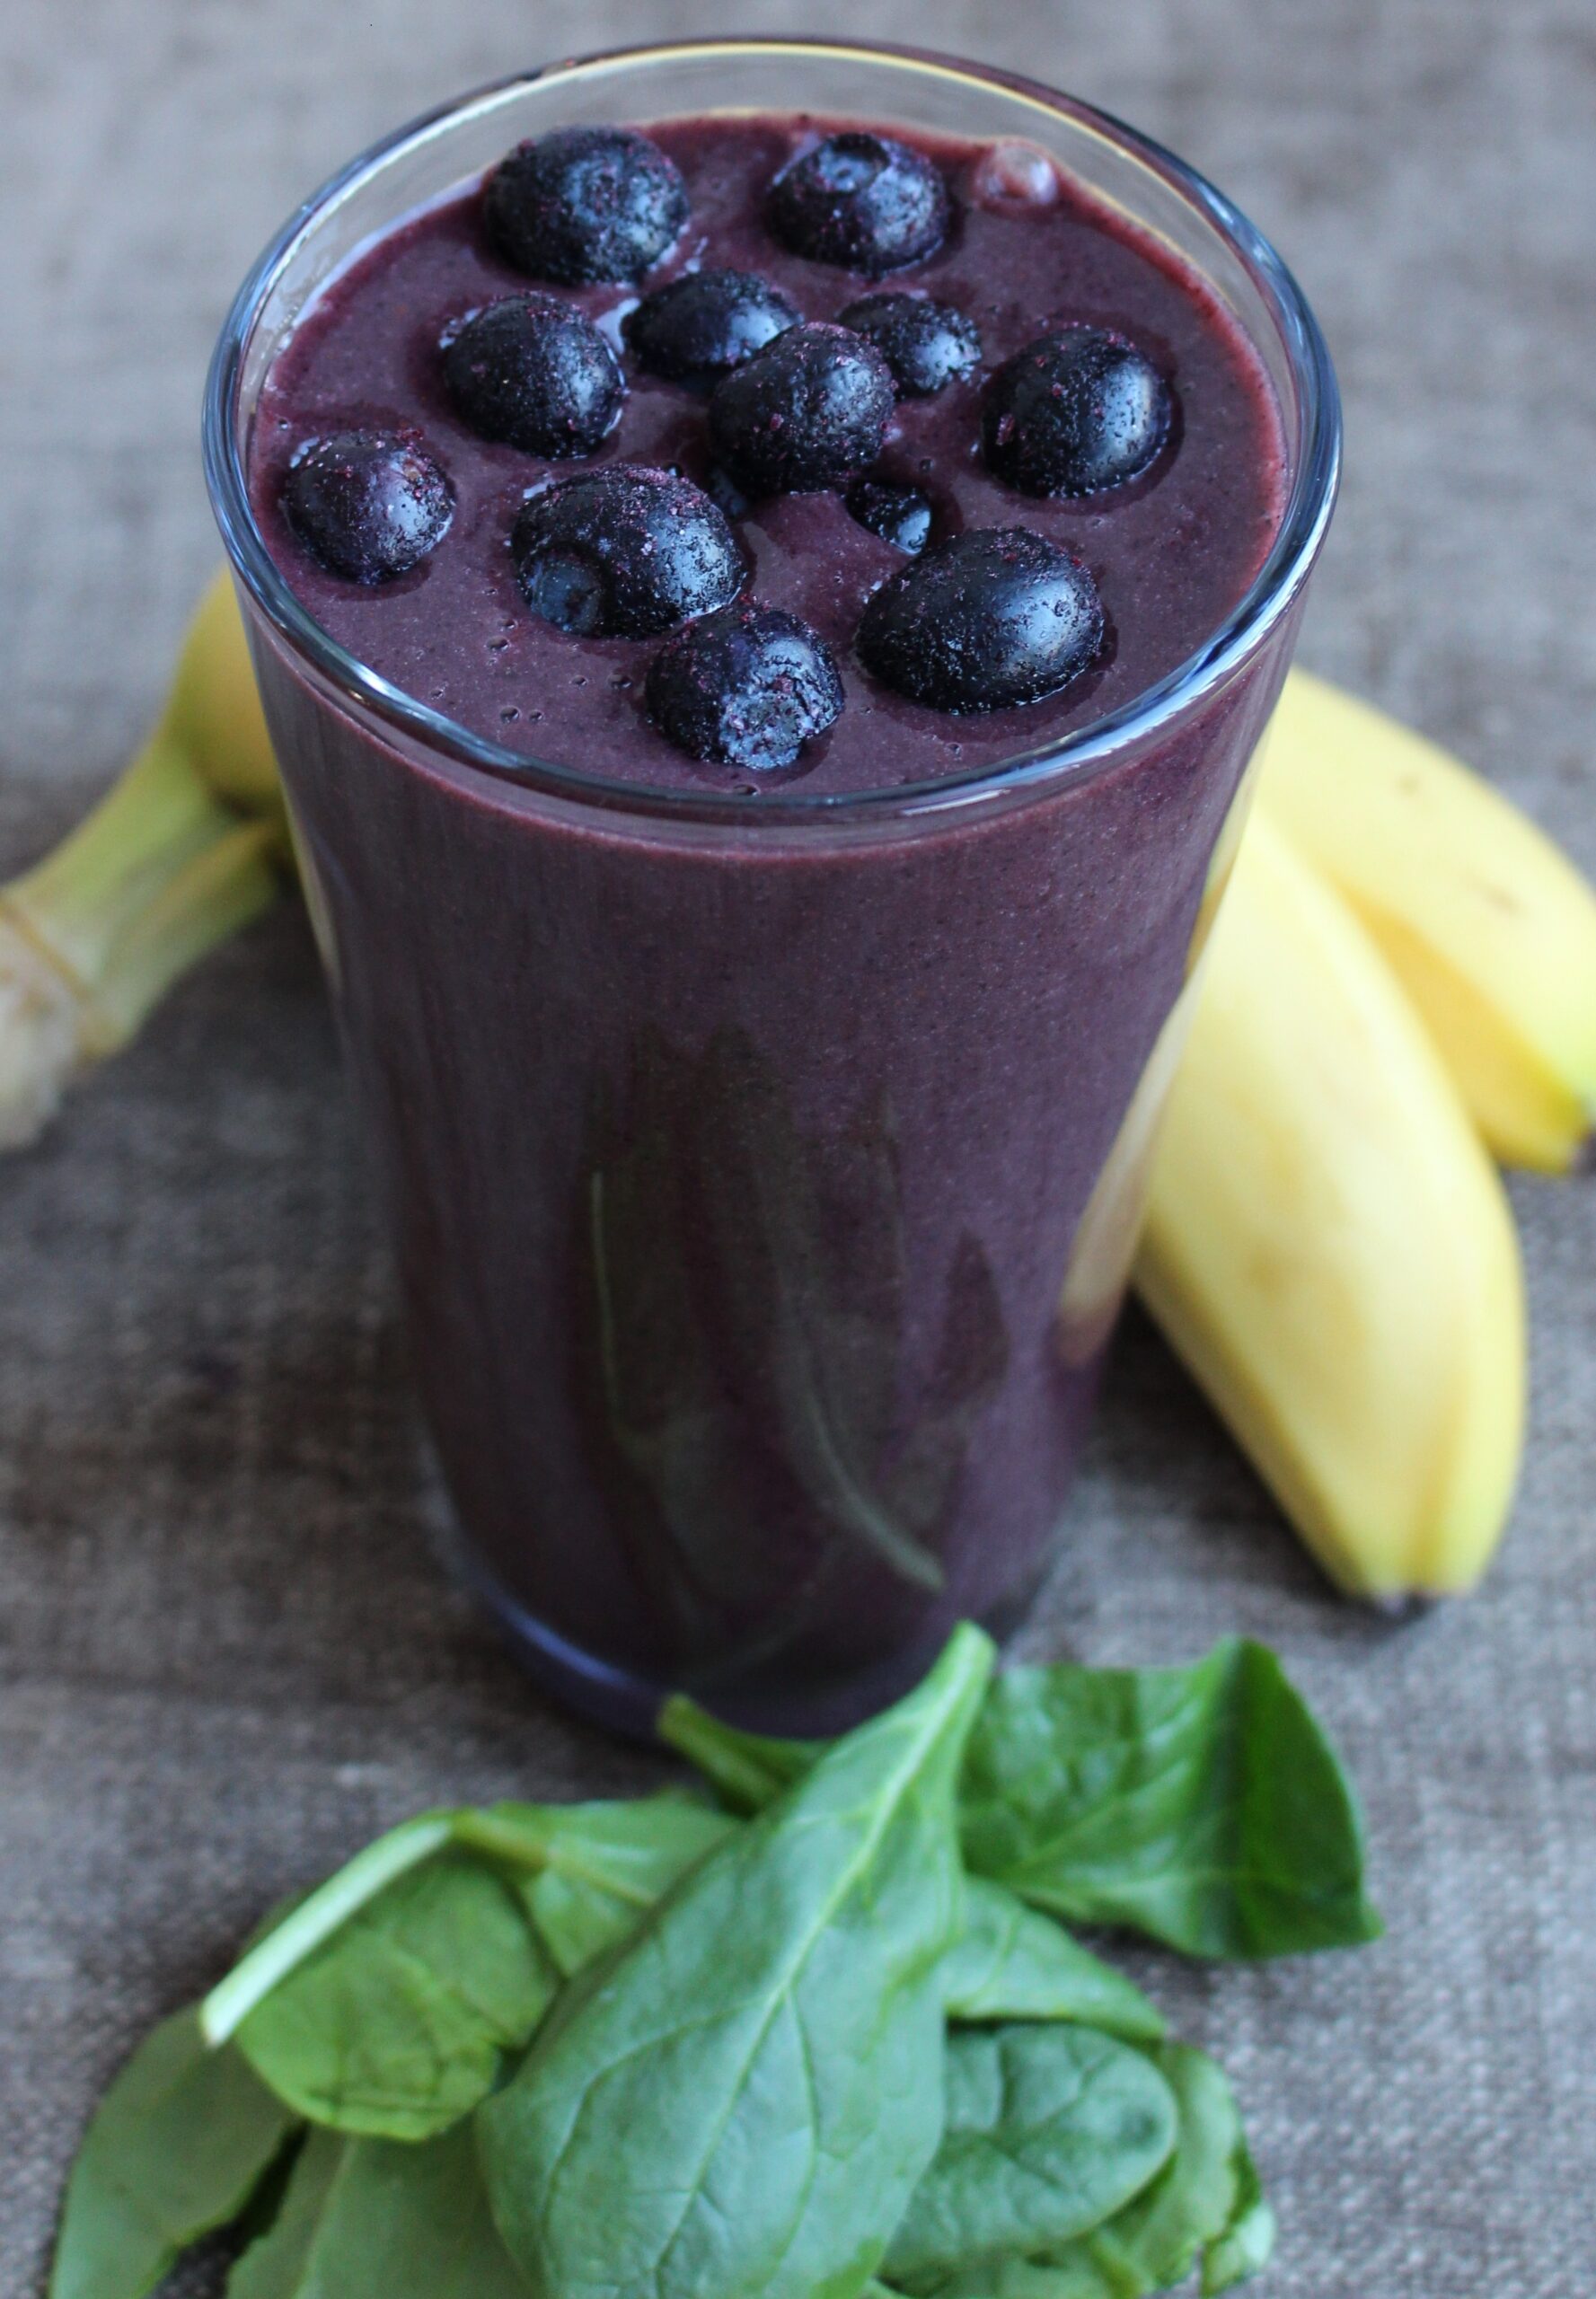 Blueberry smoothie with banana and spinach on the side